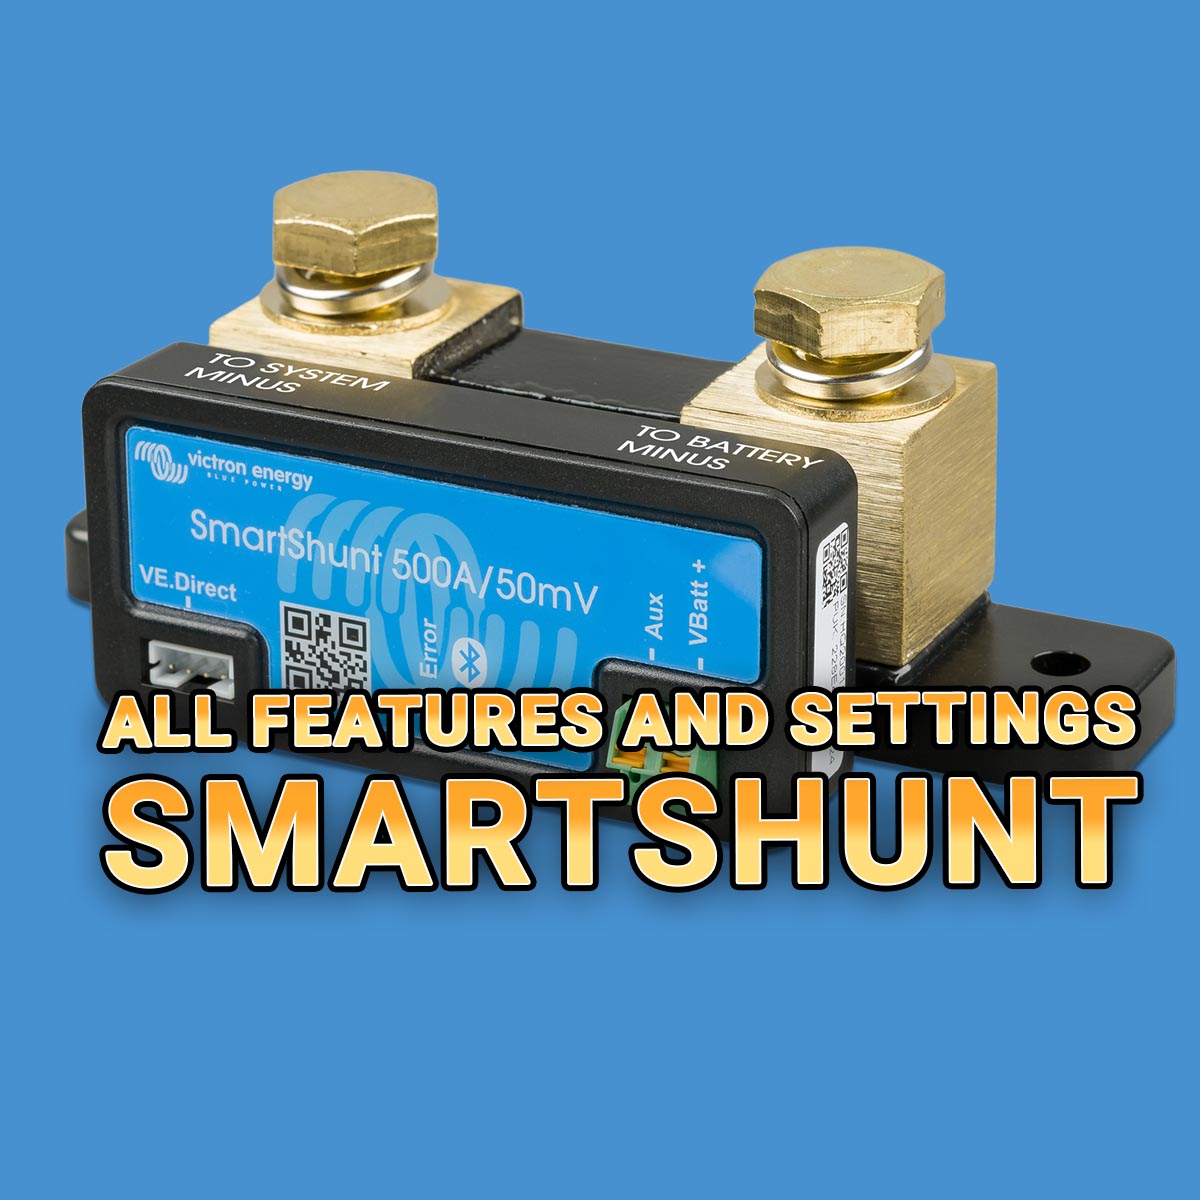 https://www.bluepower.pro/wp-content/uploads/2023/11/All-Features-and-Settings-of-the-Victron-SmartShunt.jpg